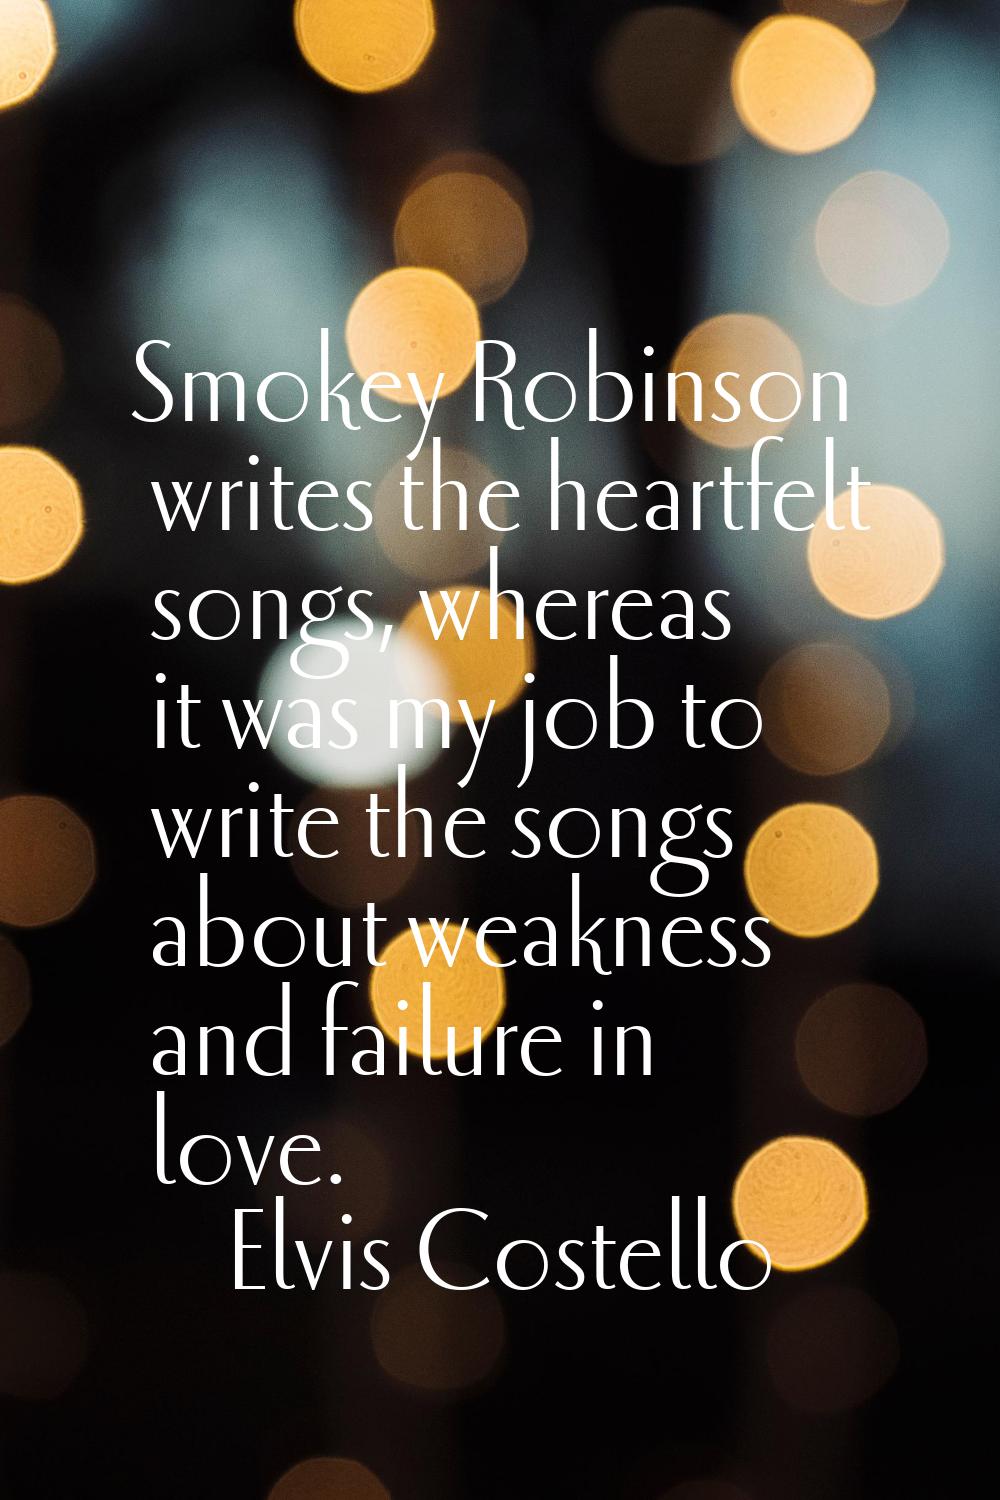 Smokey Robinson writes the heartfelt songs, whereas it was my job to write the songs about weakness